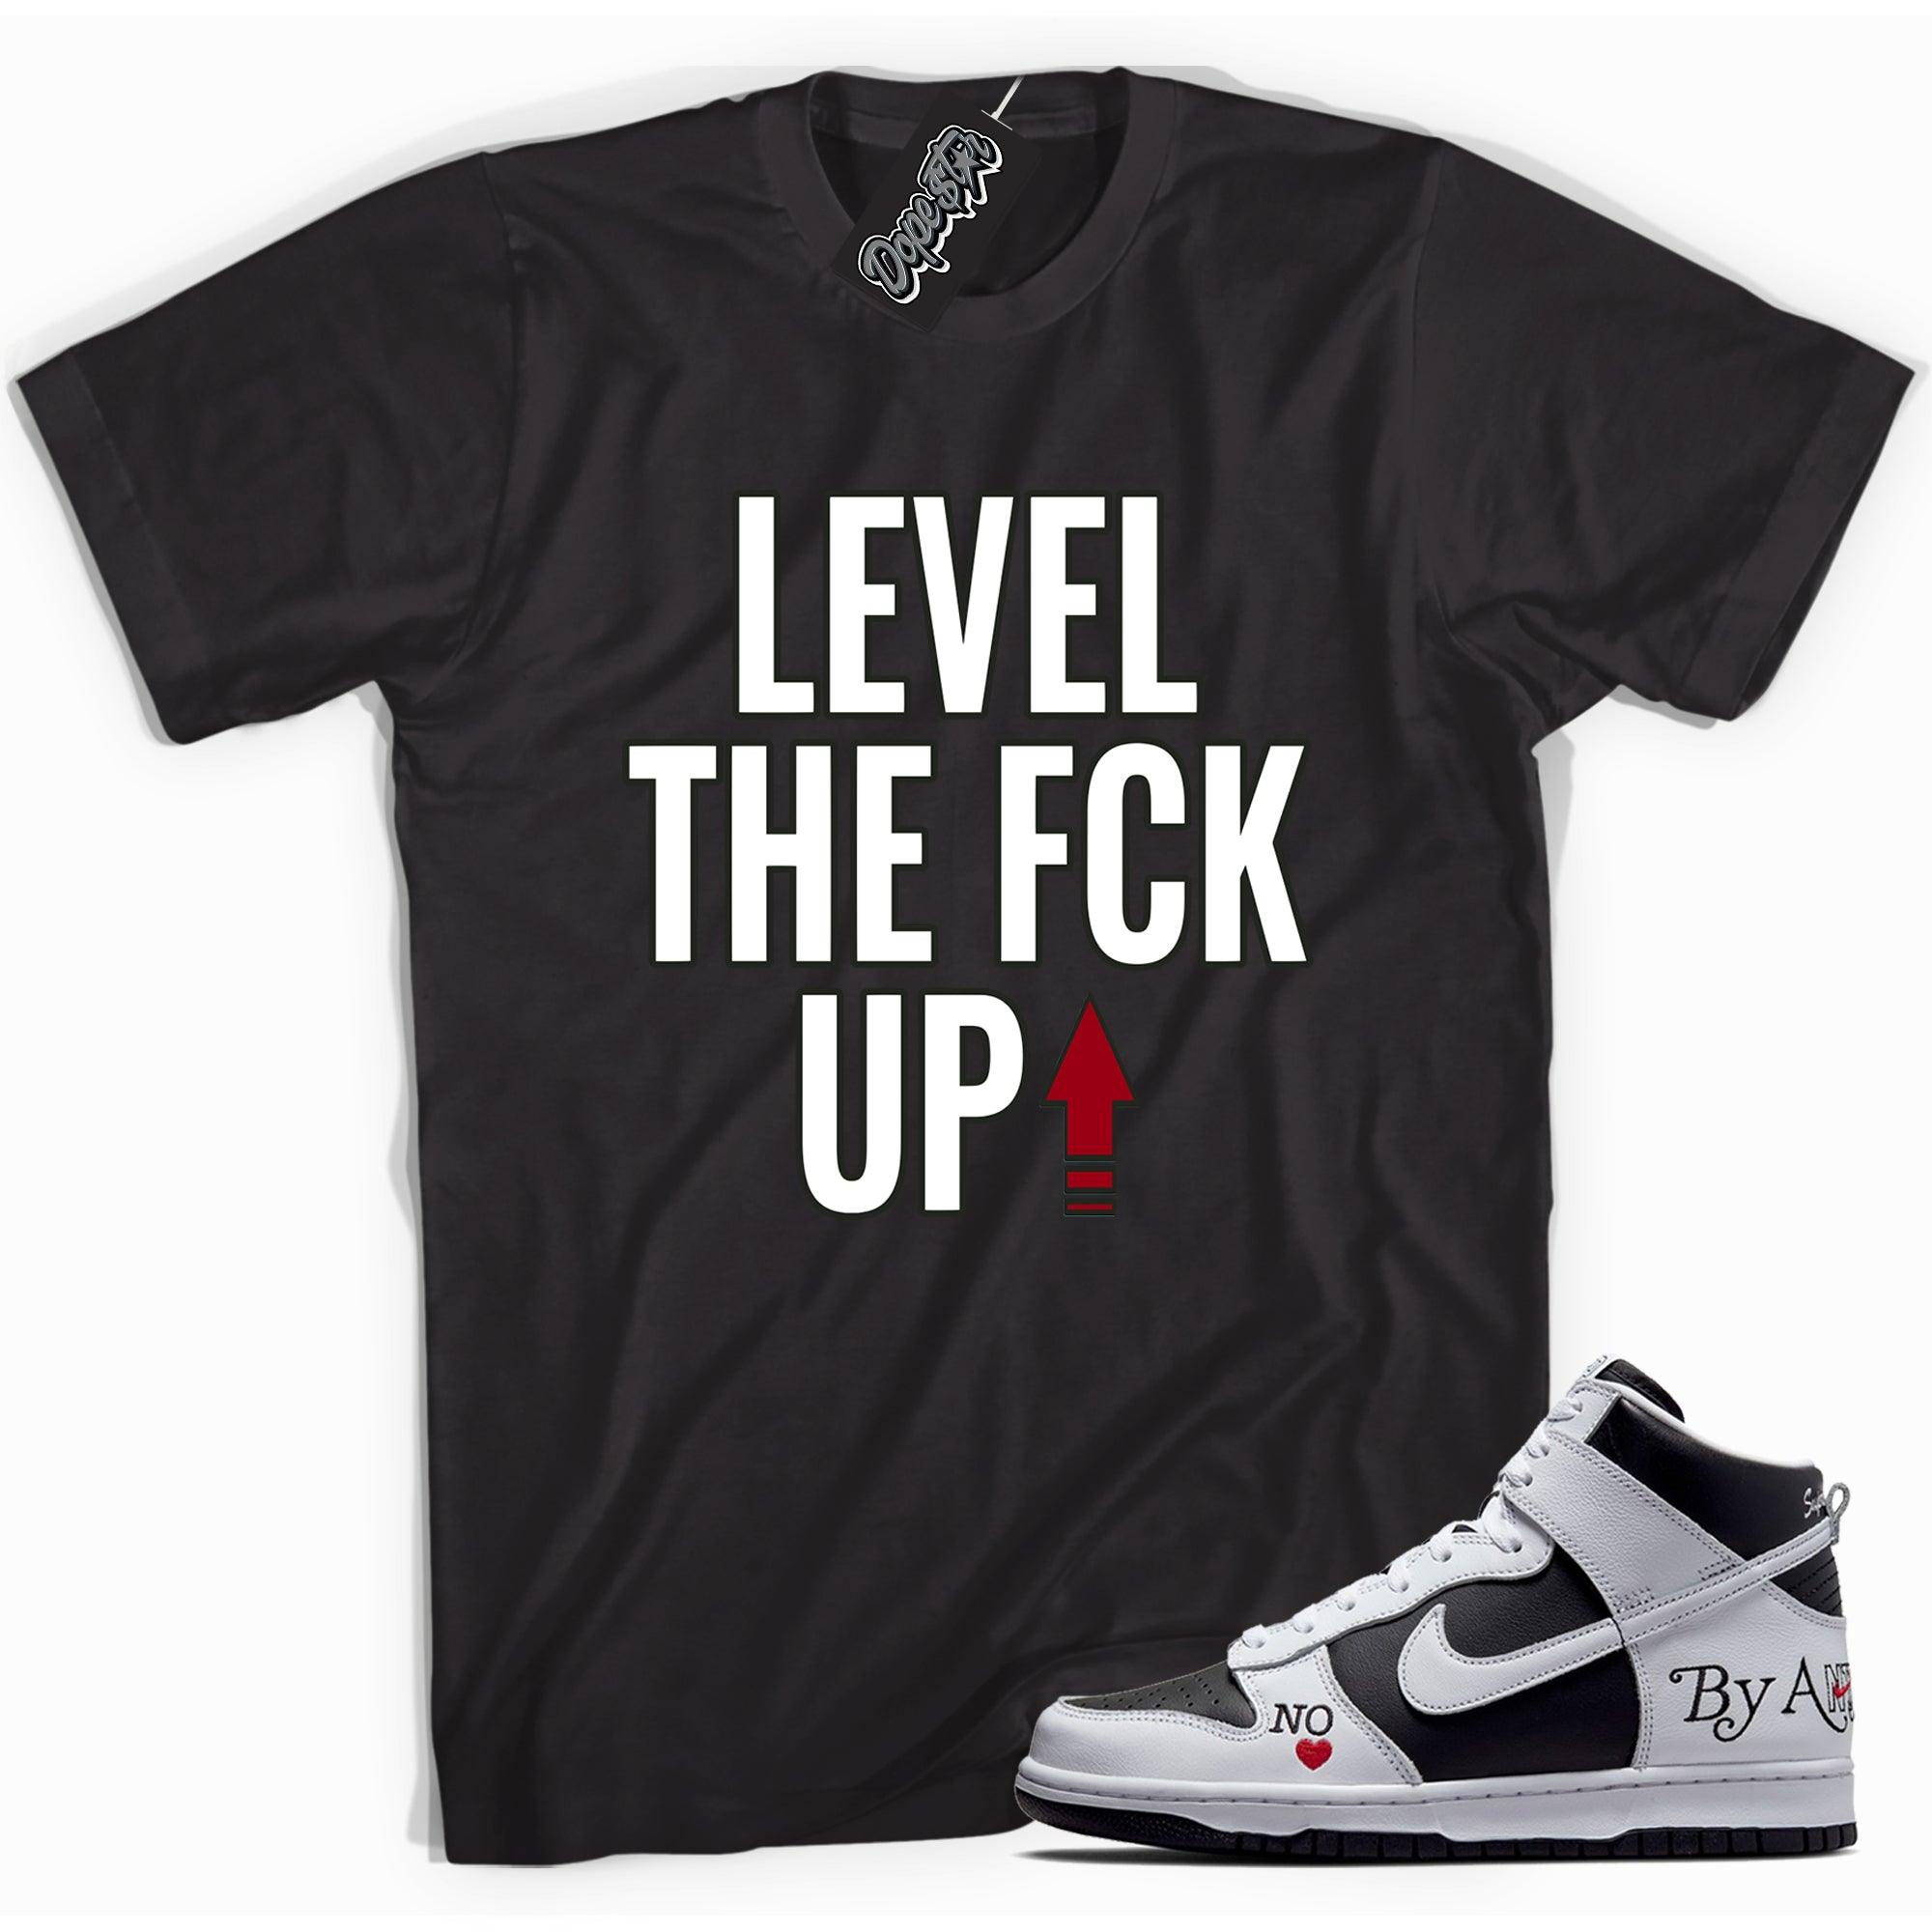 Cool black graphic tee with 'Level Up' print, that perfectly matches Nike SB Dunk High Supreme Toe sneakers.